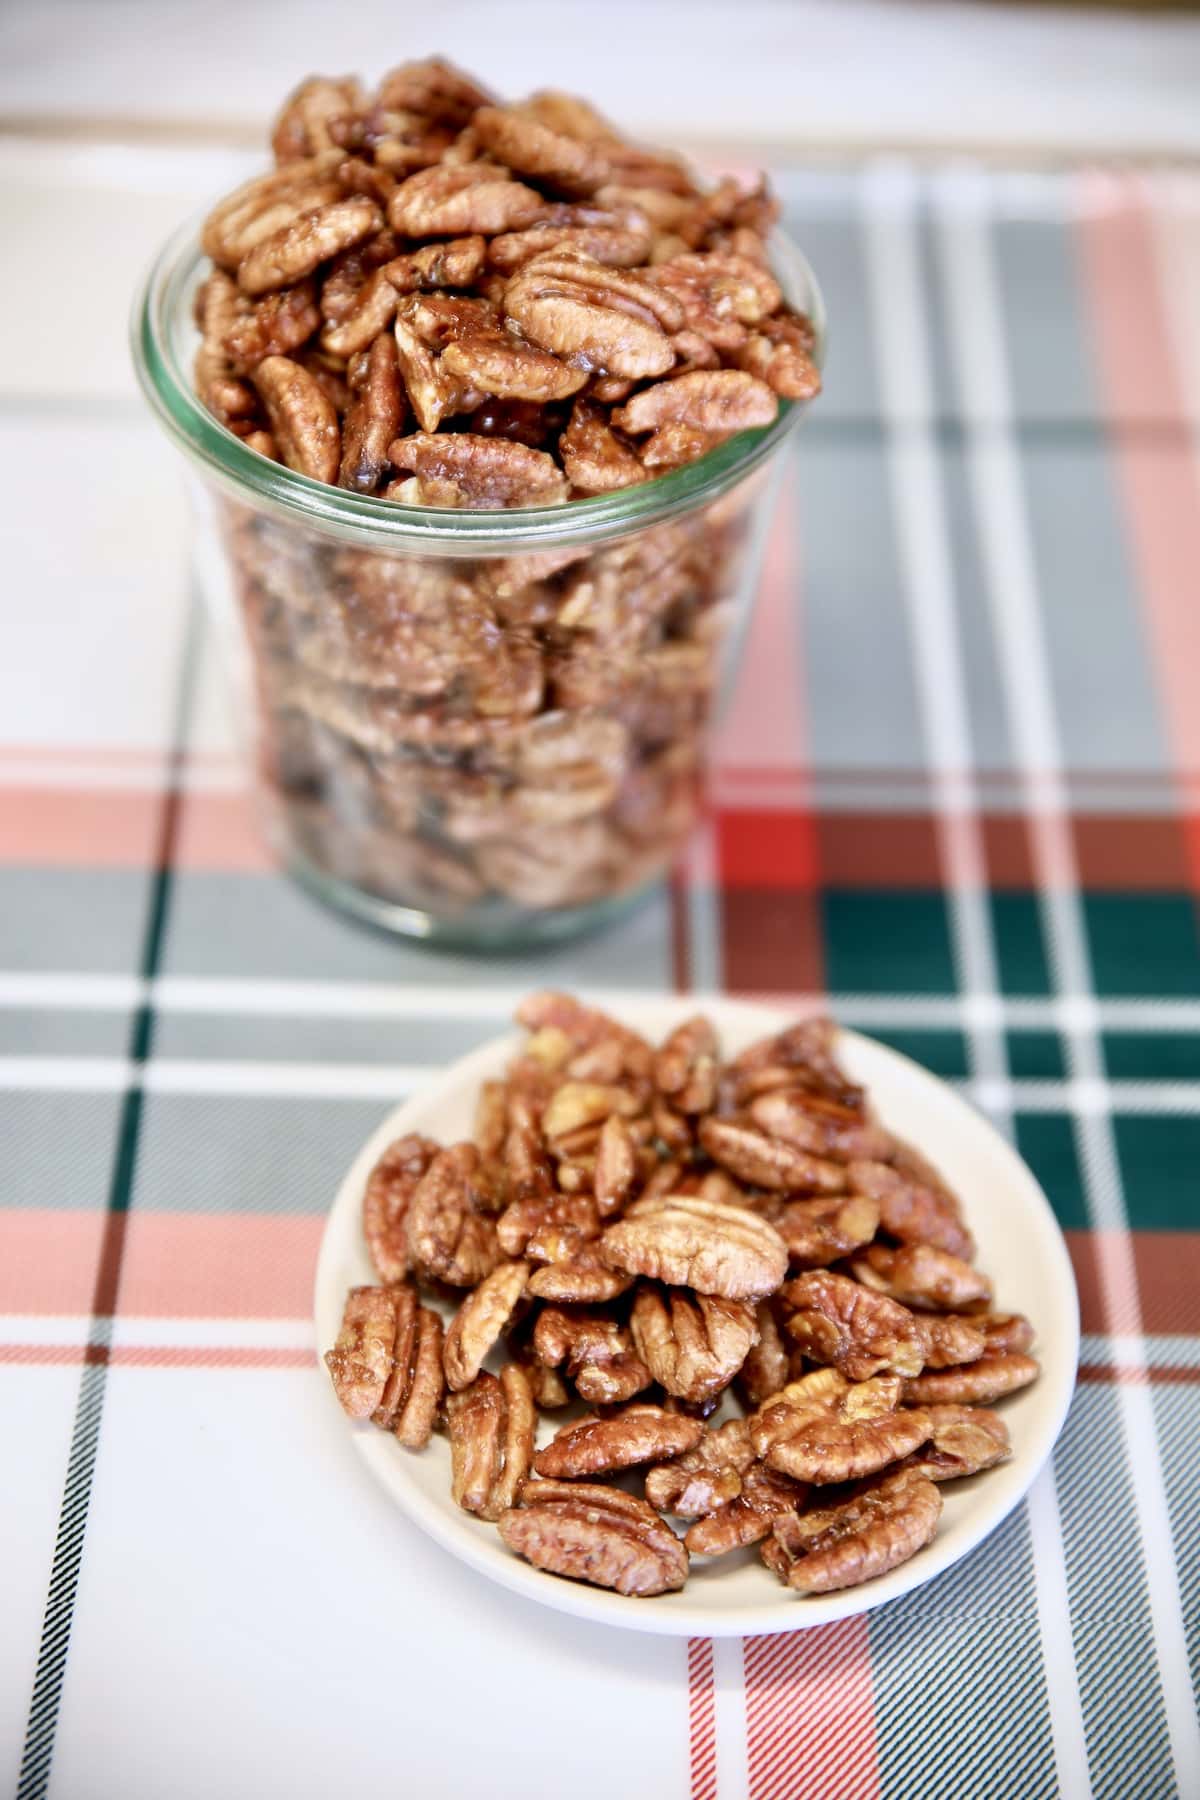 Jar and bowl of candied pecans.